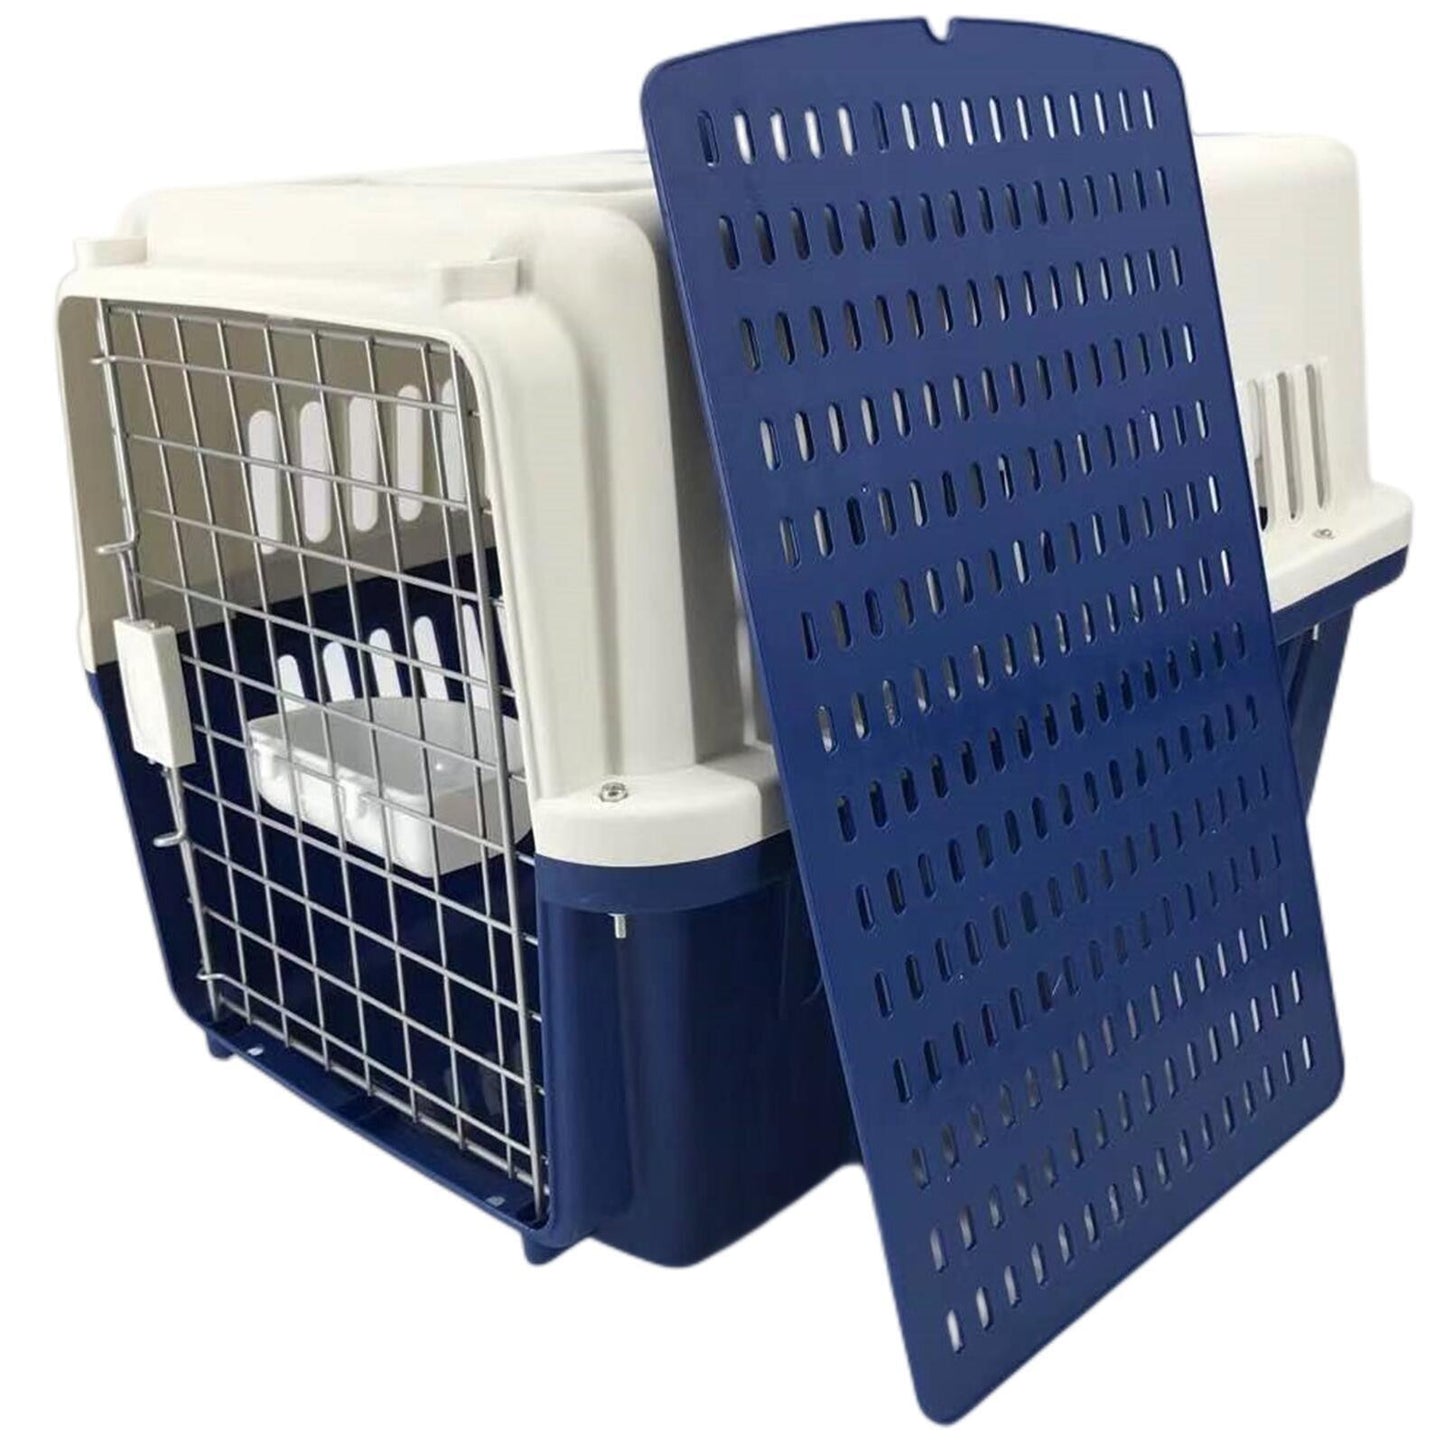 YES4PETS XL Dog Puppy Cat Crate Pet Rabbit Parrot Airline Carrier Cage W Bowl & Tray 72x53x53cm